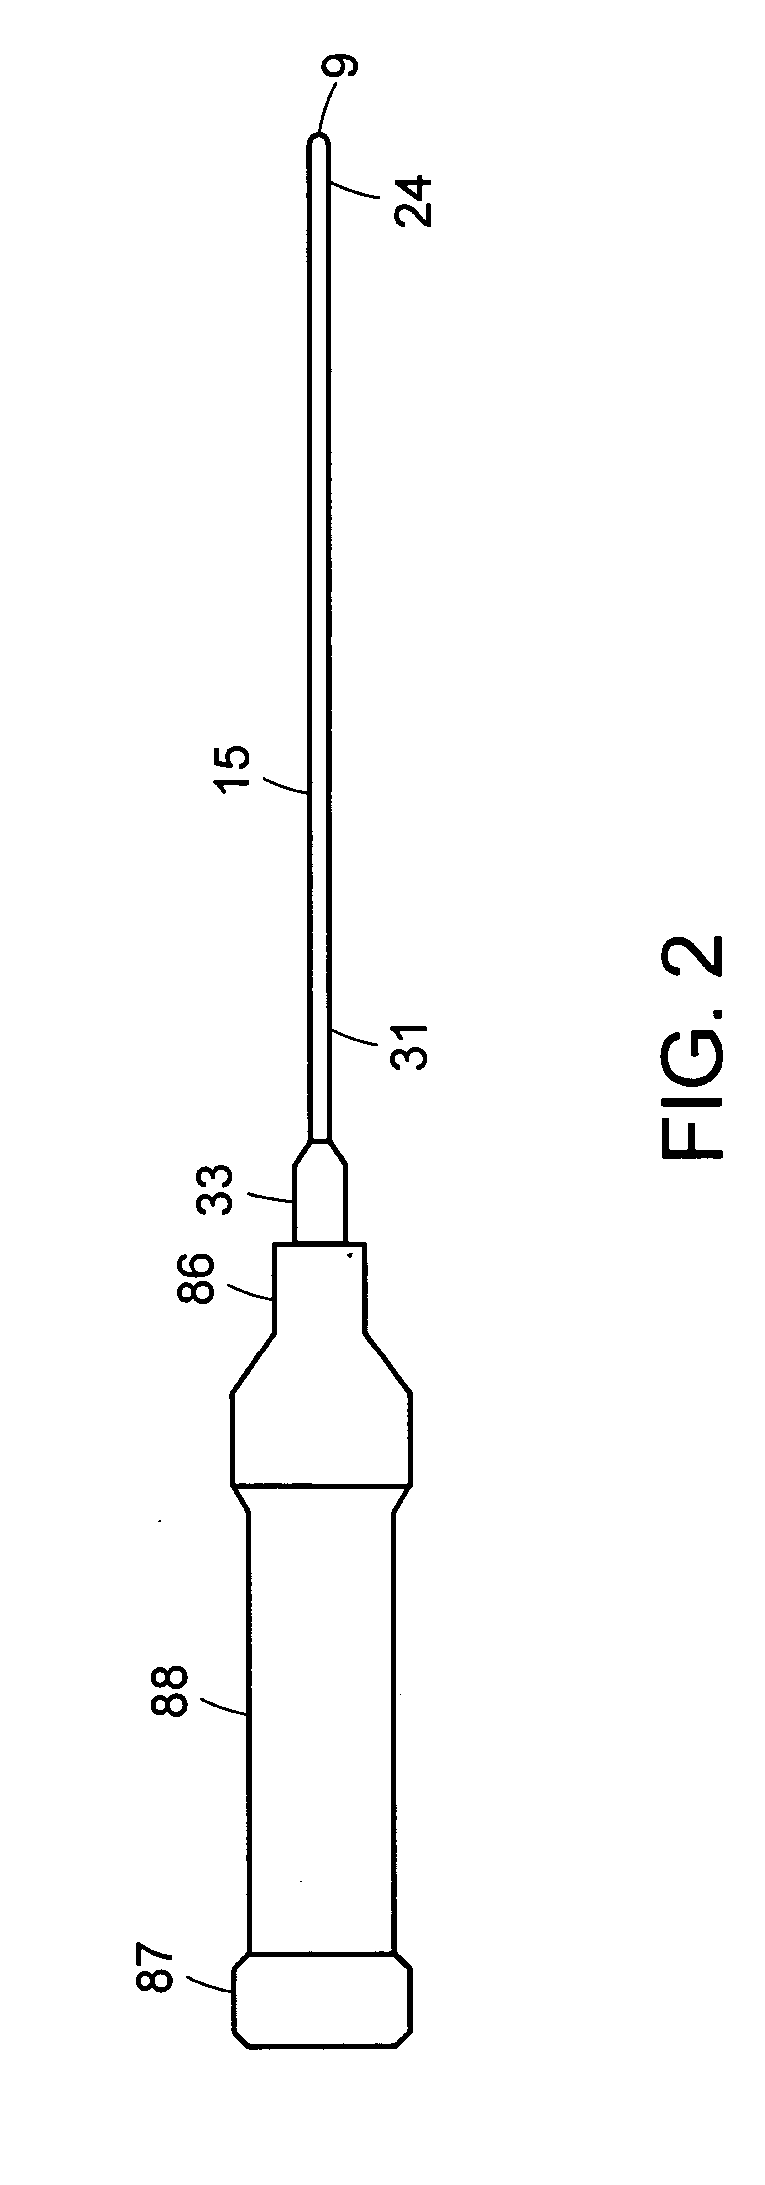 Apparatus and method for an ultrasonic medical device operating in a torsional mode